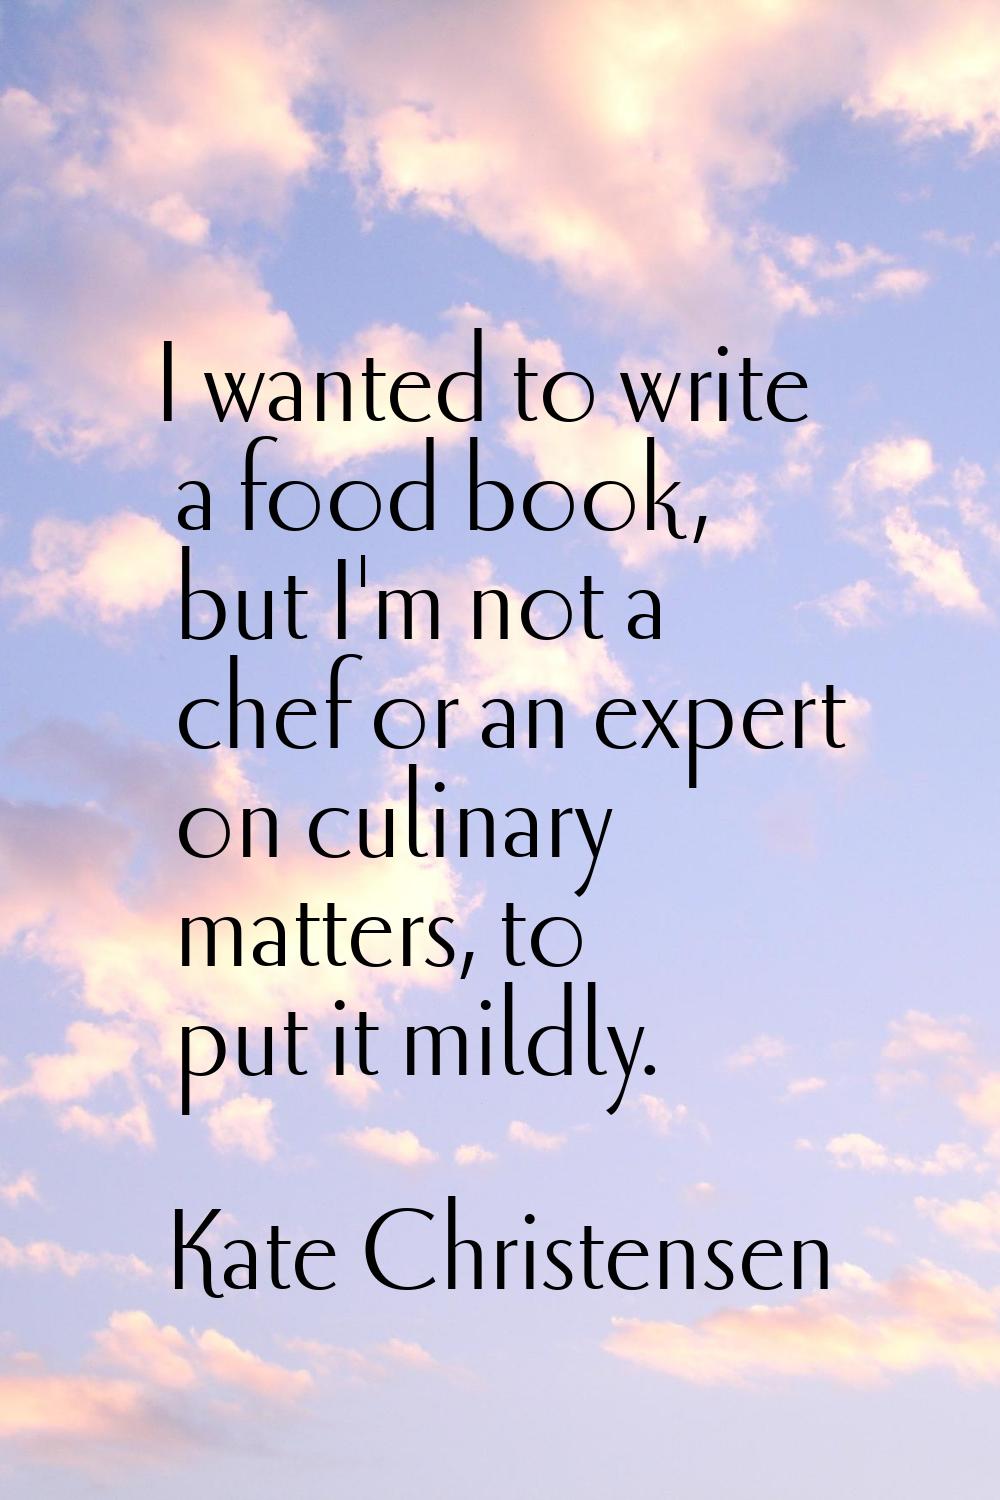 I wanted to write a food book, but I'm not a chef or an expert on culinary matters, to put it mildl